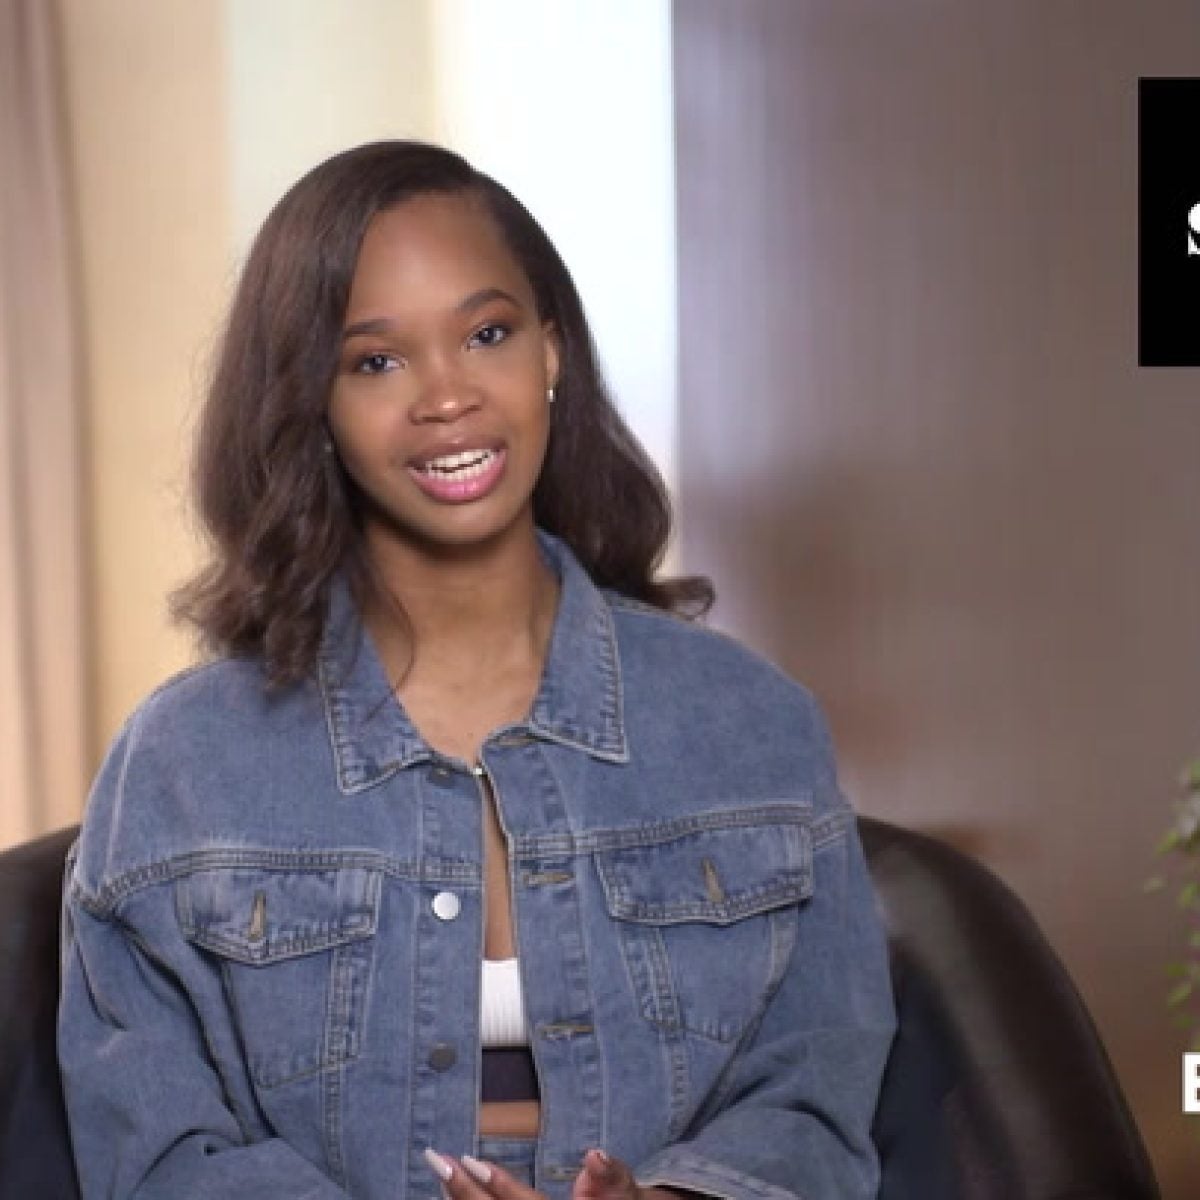 Quvenzhané Wallis Finds Her ‘Swagger’ On New Apple TV+ Show